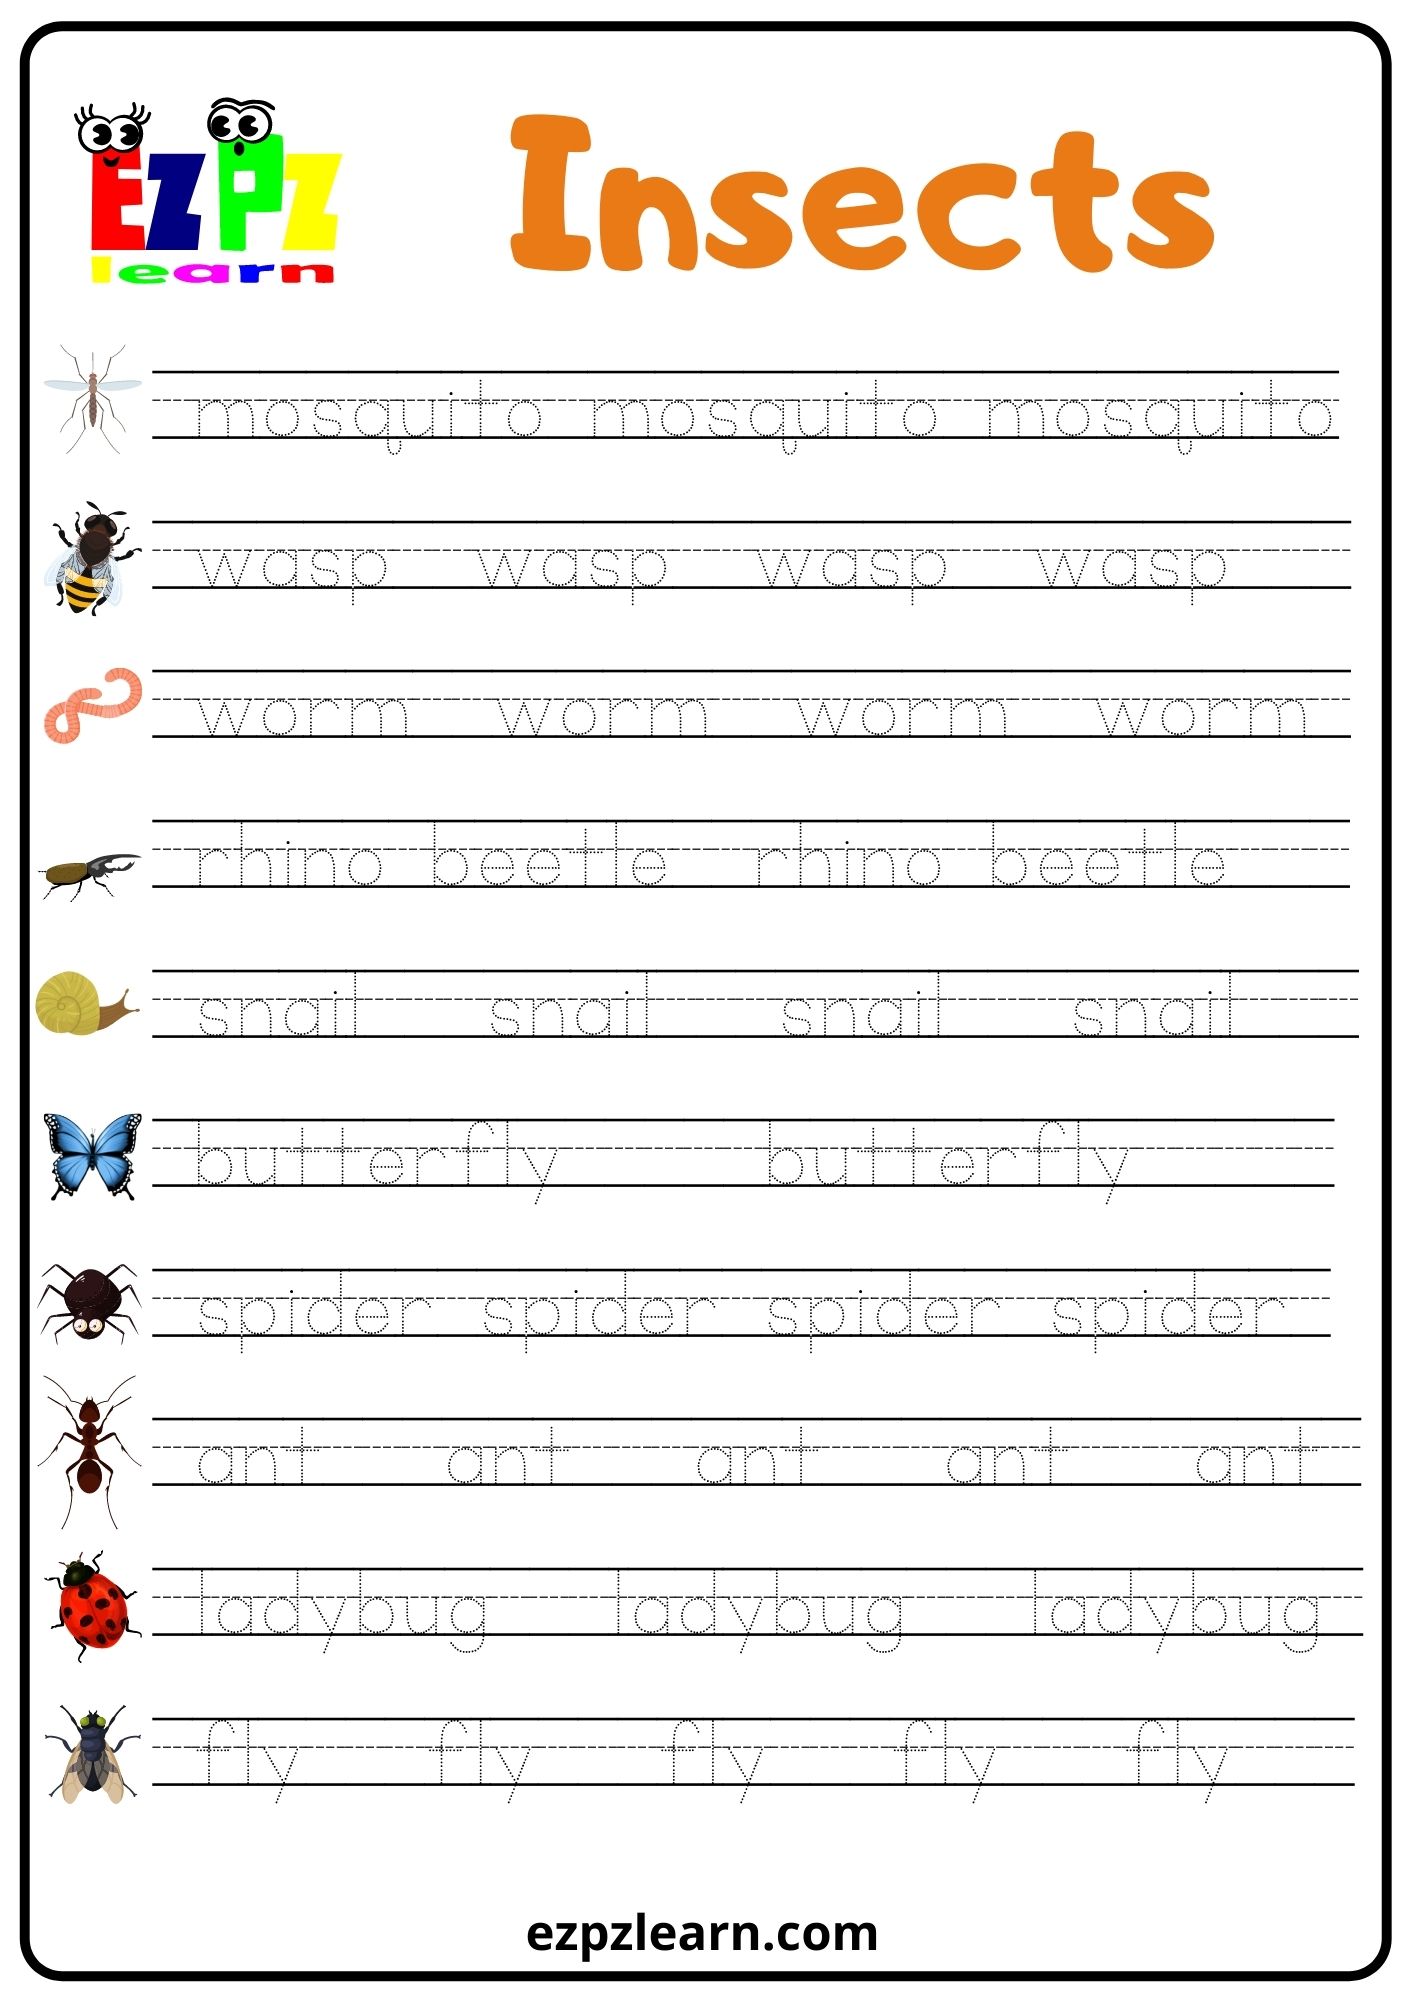 What Bugs You Worksheet